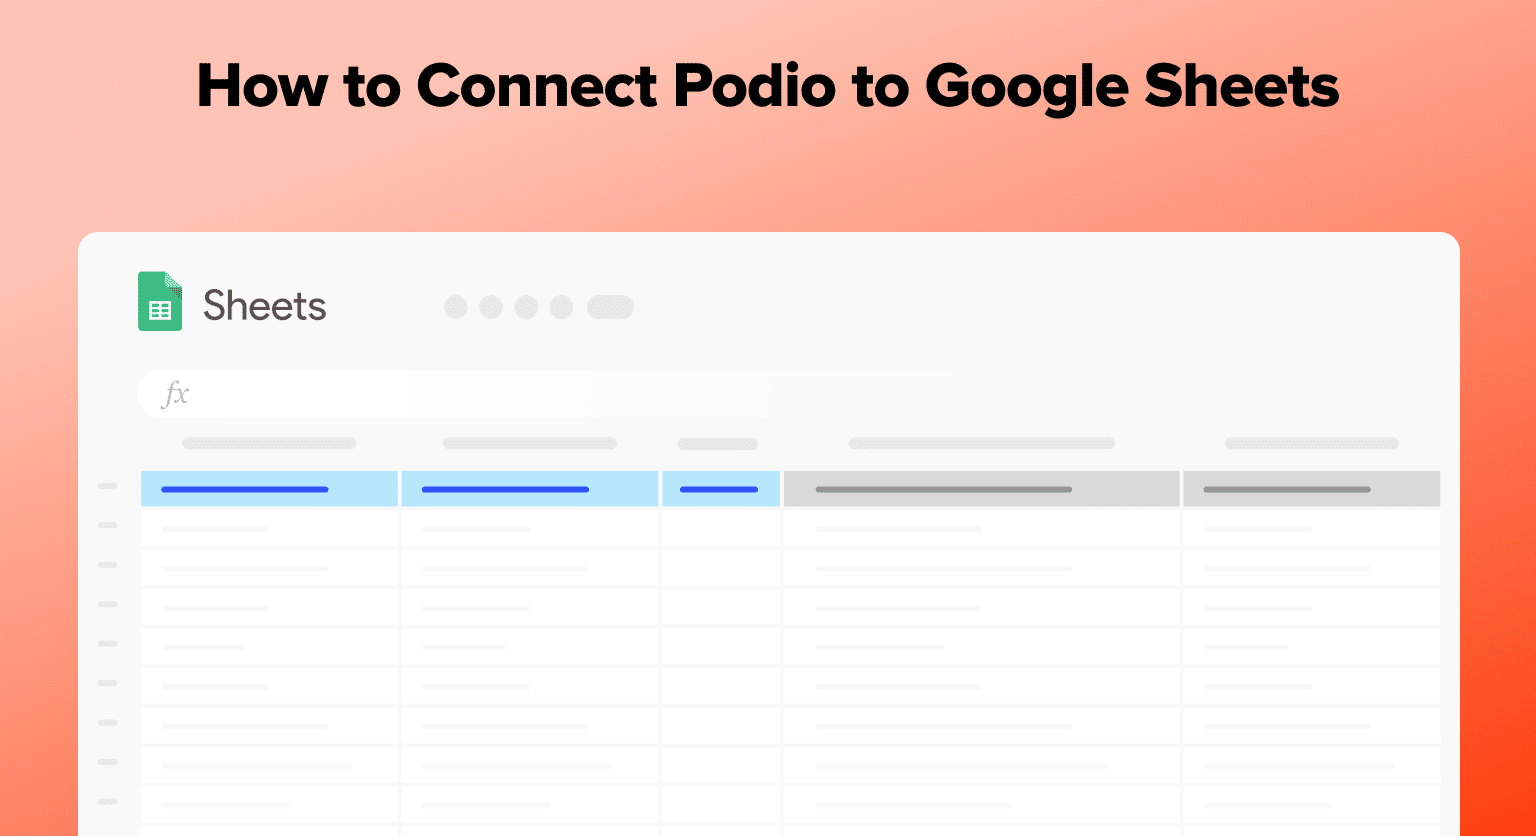 Connect Podio to Google Sheets